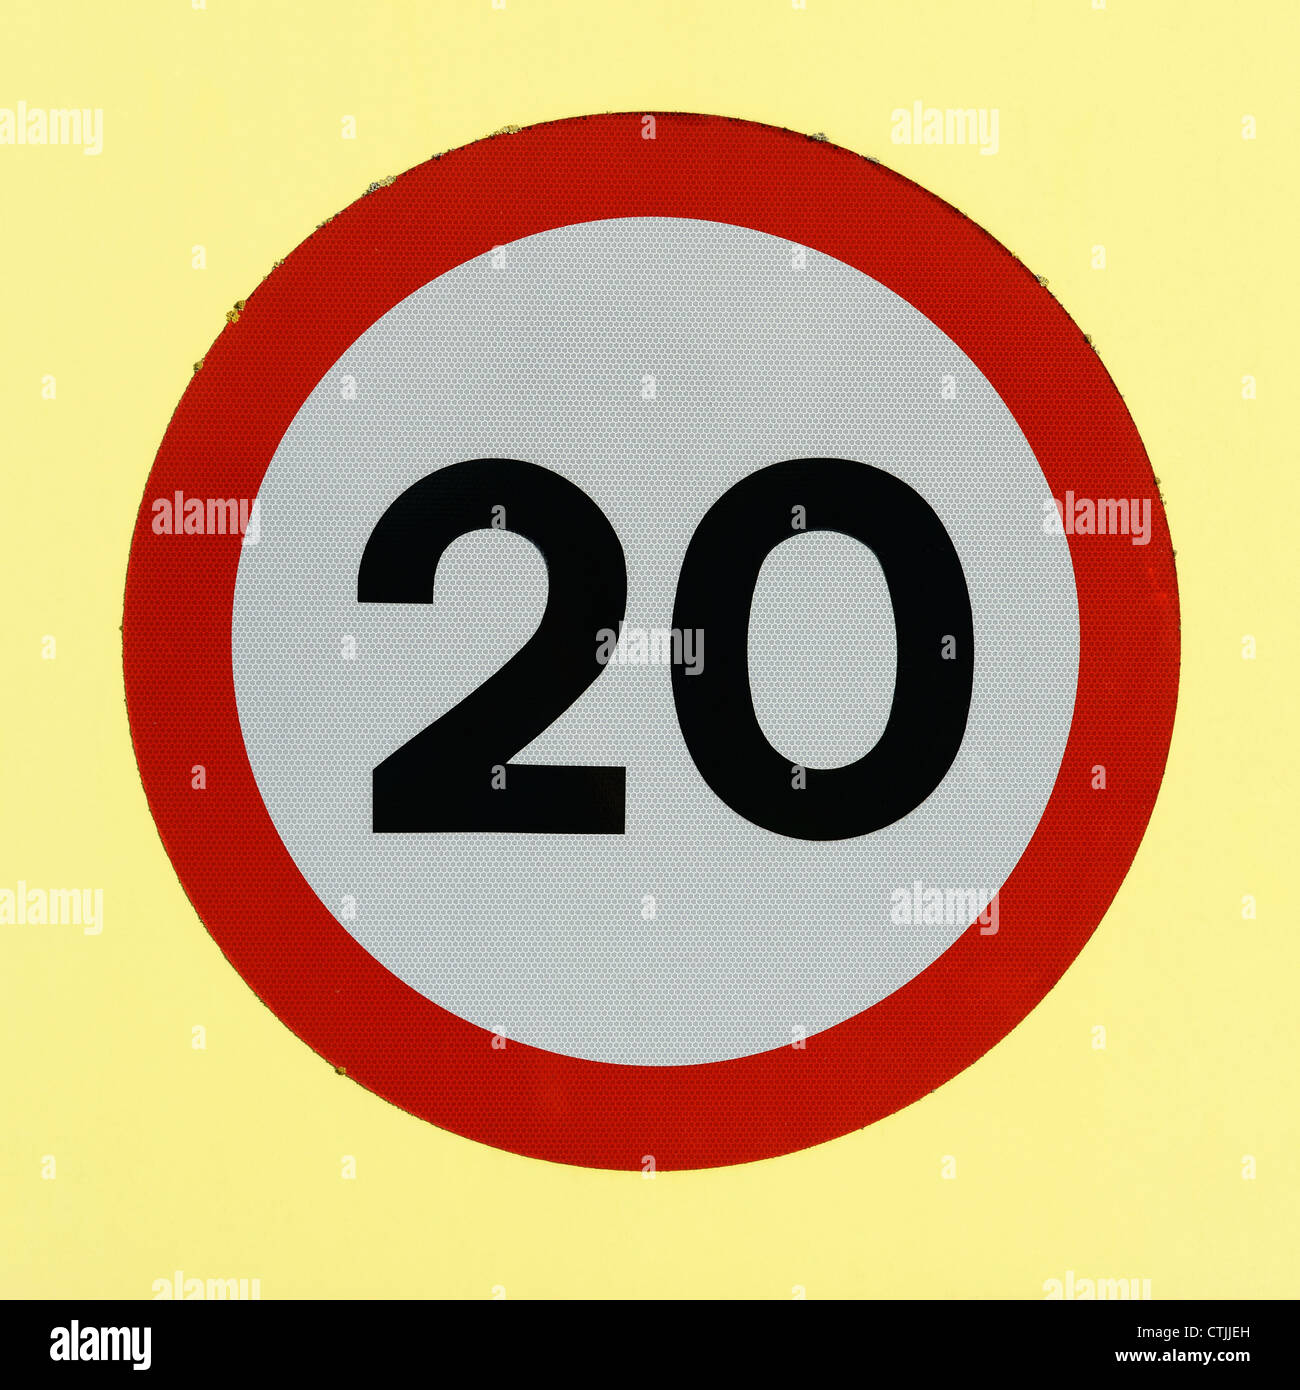 20 Speed Limit road sign Stock Photo